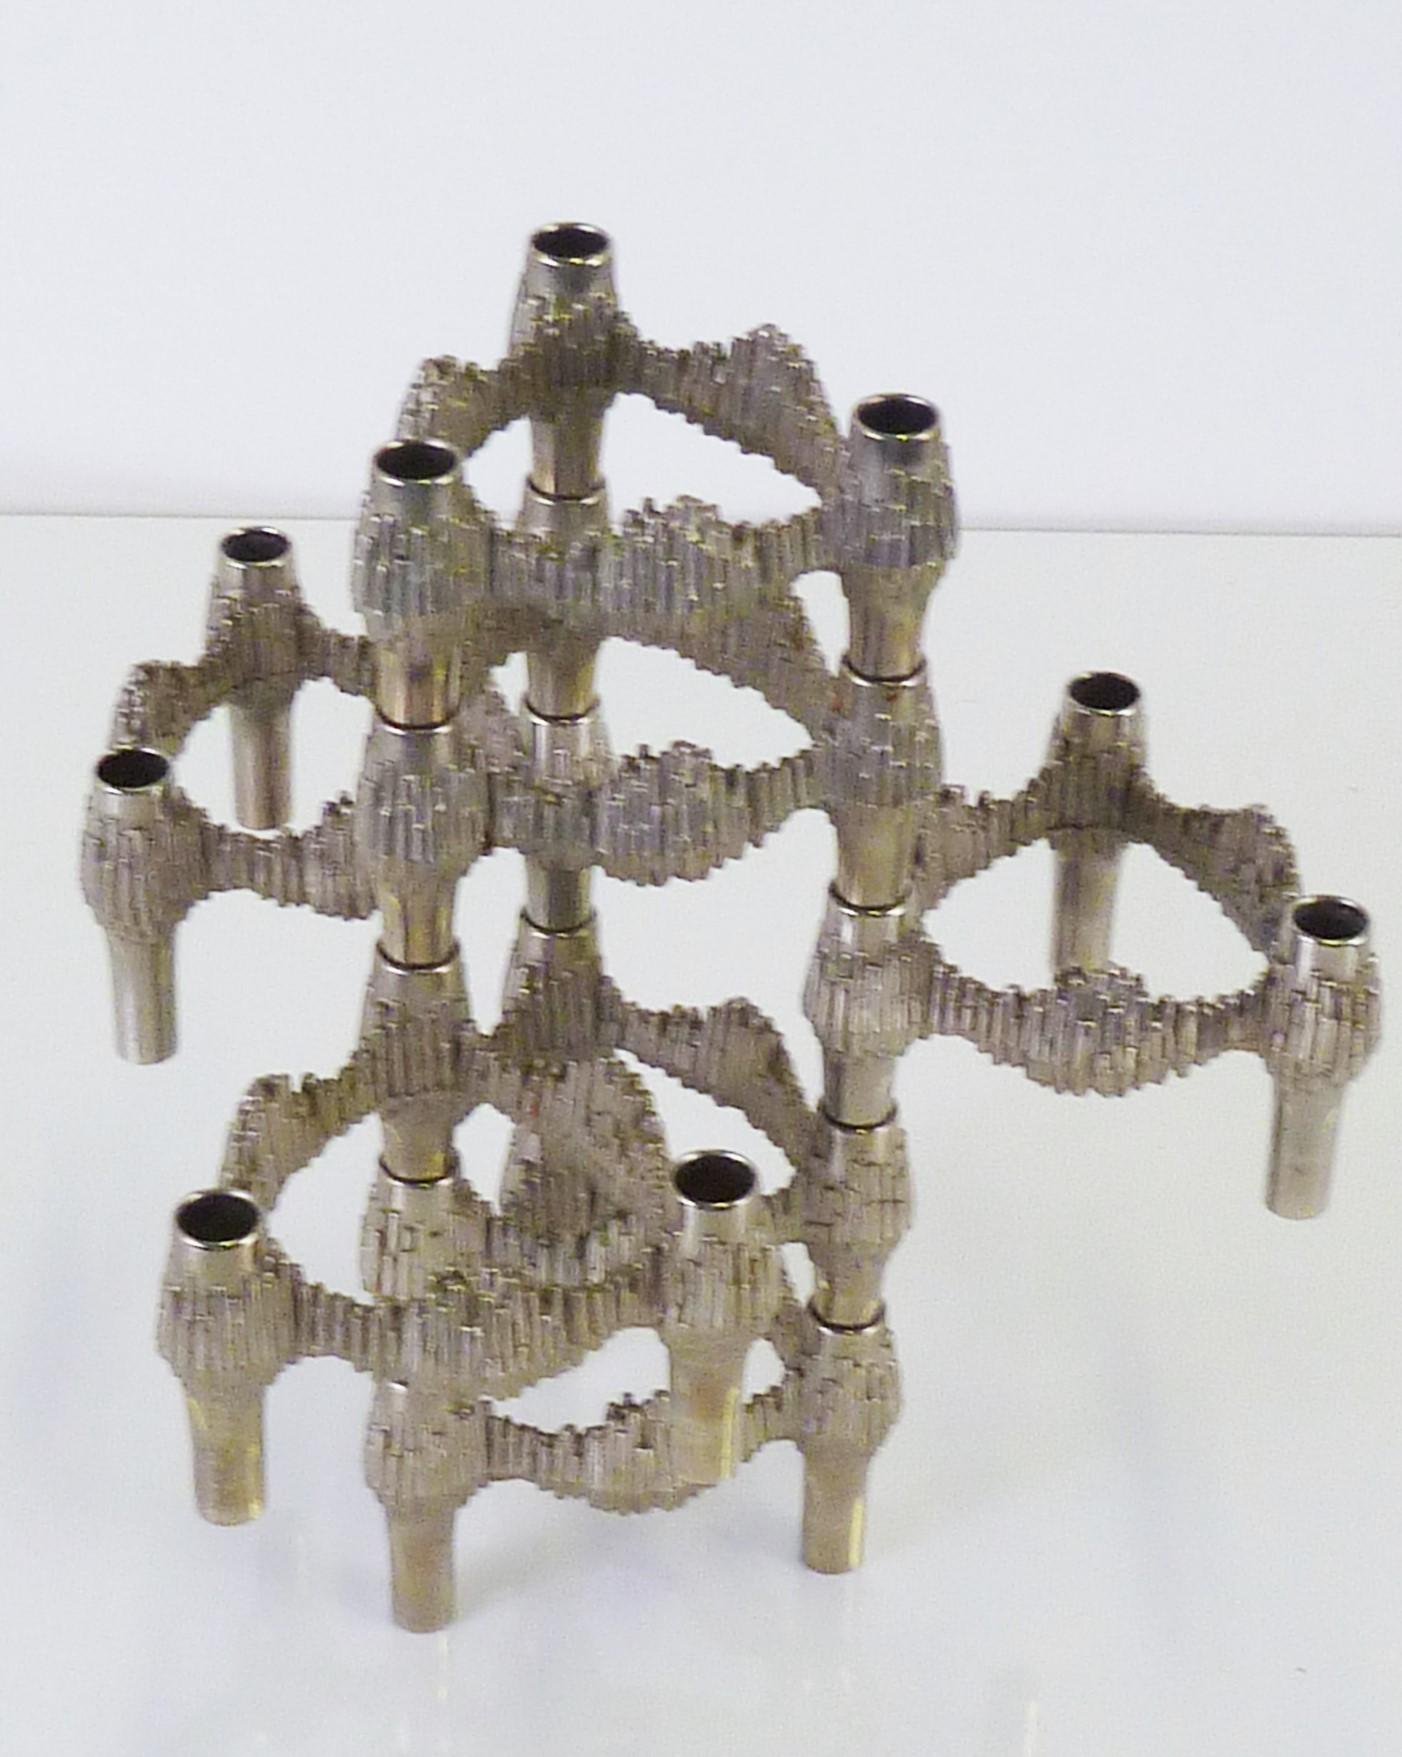 Set of 7 Quist Variomaster stackable Brutalist candleholders designed by Caesar Stoffi for BMF Nagel, Germany 1970s. These particular candleholders are not seen as often as the more common Nagel candleholder with its smooth finish also made from